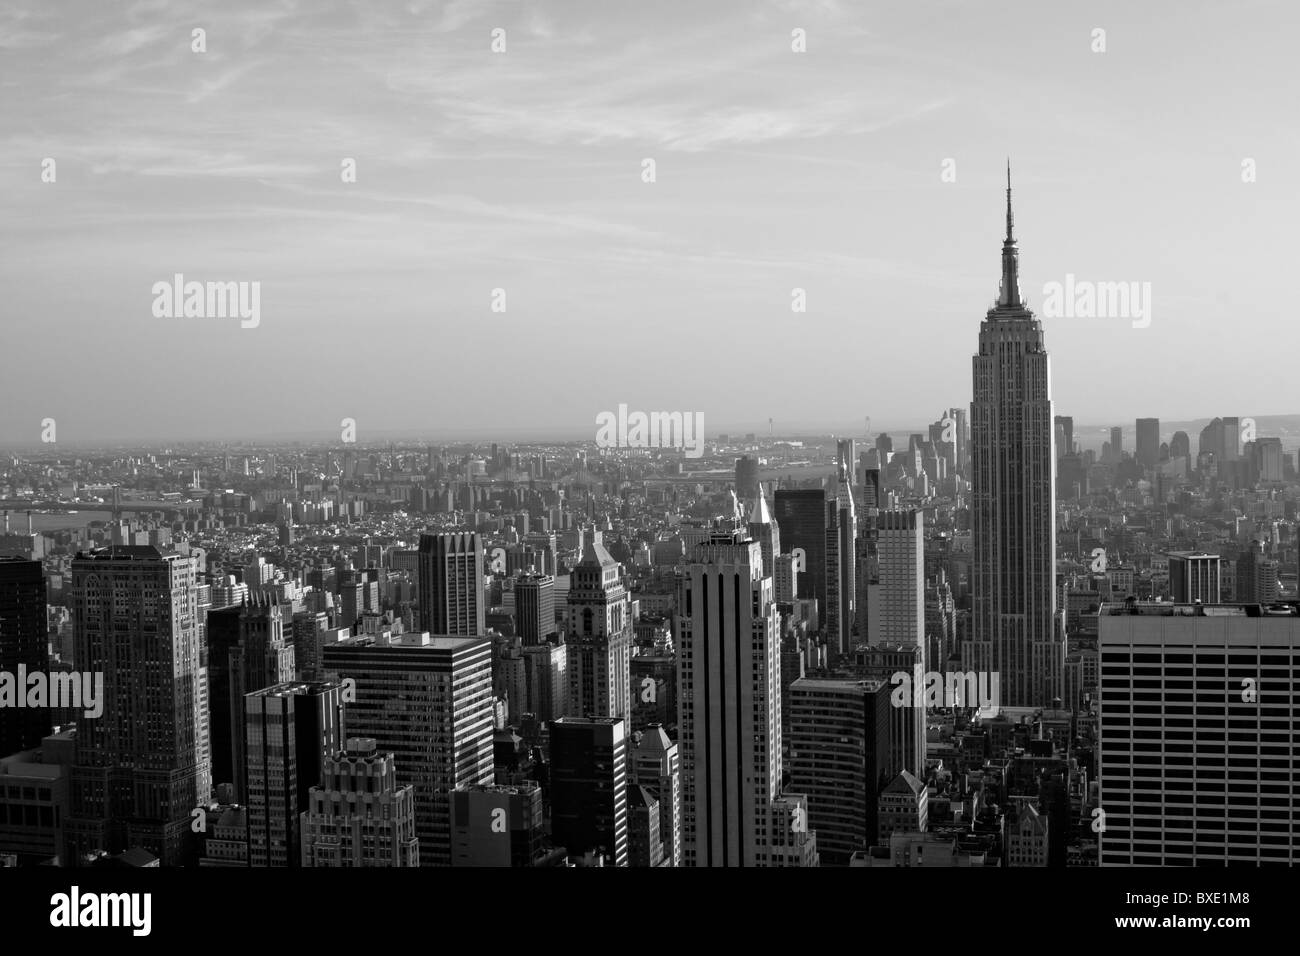 View of NY city skyline with Empire State Building from the Rockefeller Center - 'Top of the Rock'. Stock Photo